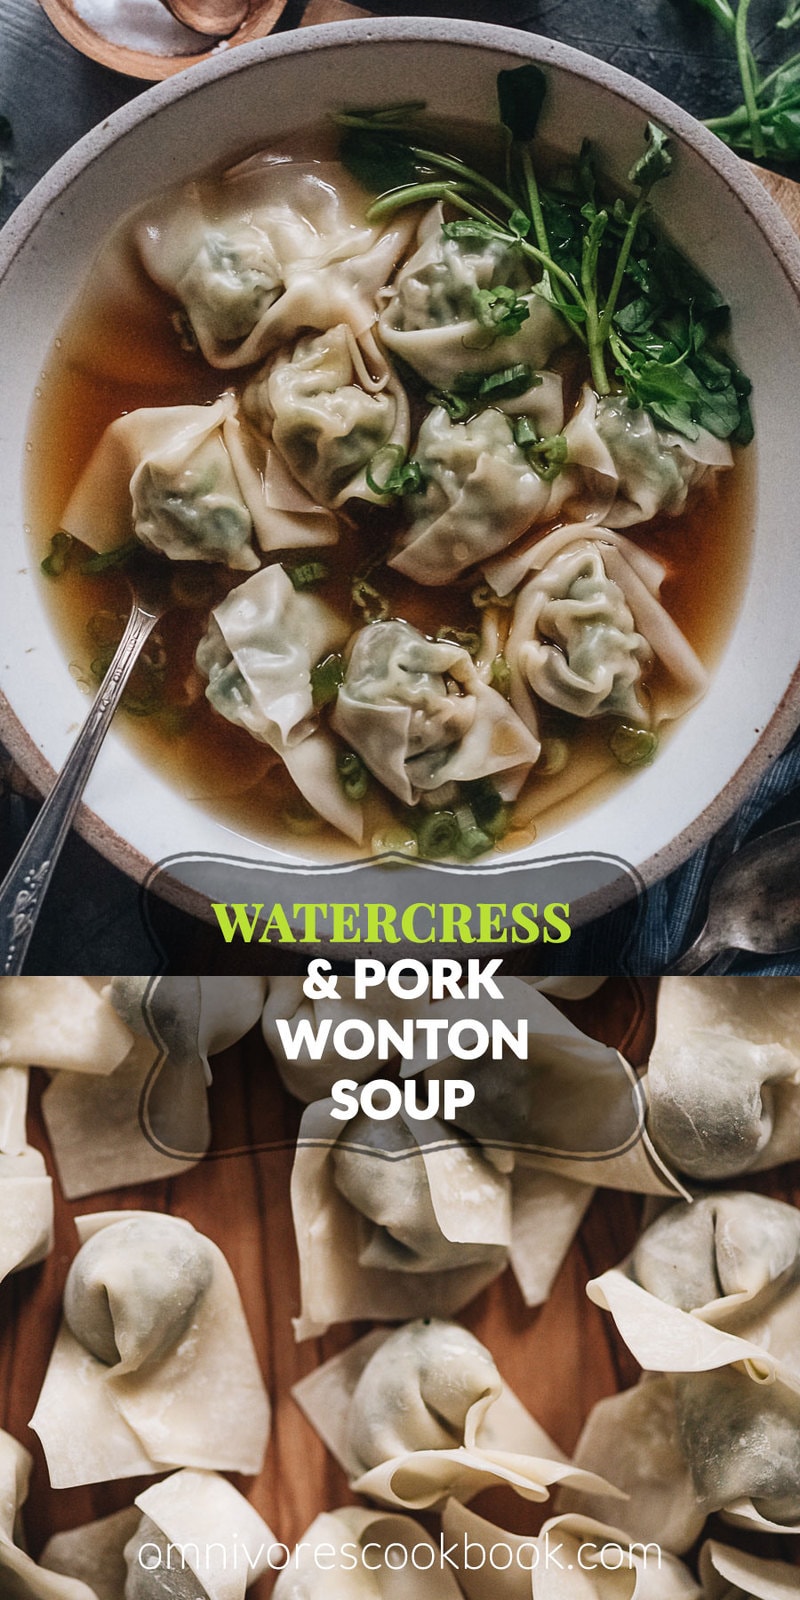 Watercress Wonton Soup | Hearty, healthy wontons made with crisp watercress and juicy pork, served in a quick and easy chicken broth. This post includes detailed step-by-step photos to help you create the authentic dim sum experience in your own kitchen.